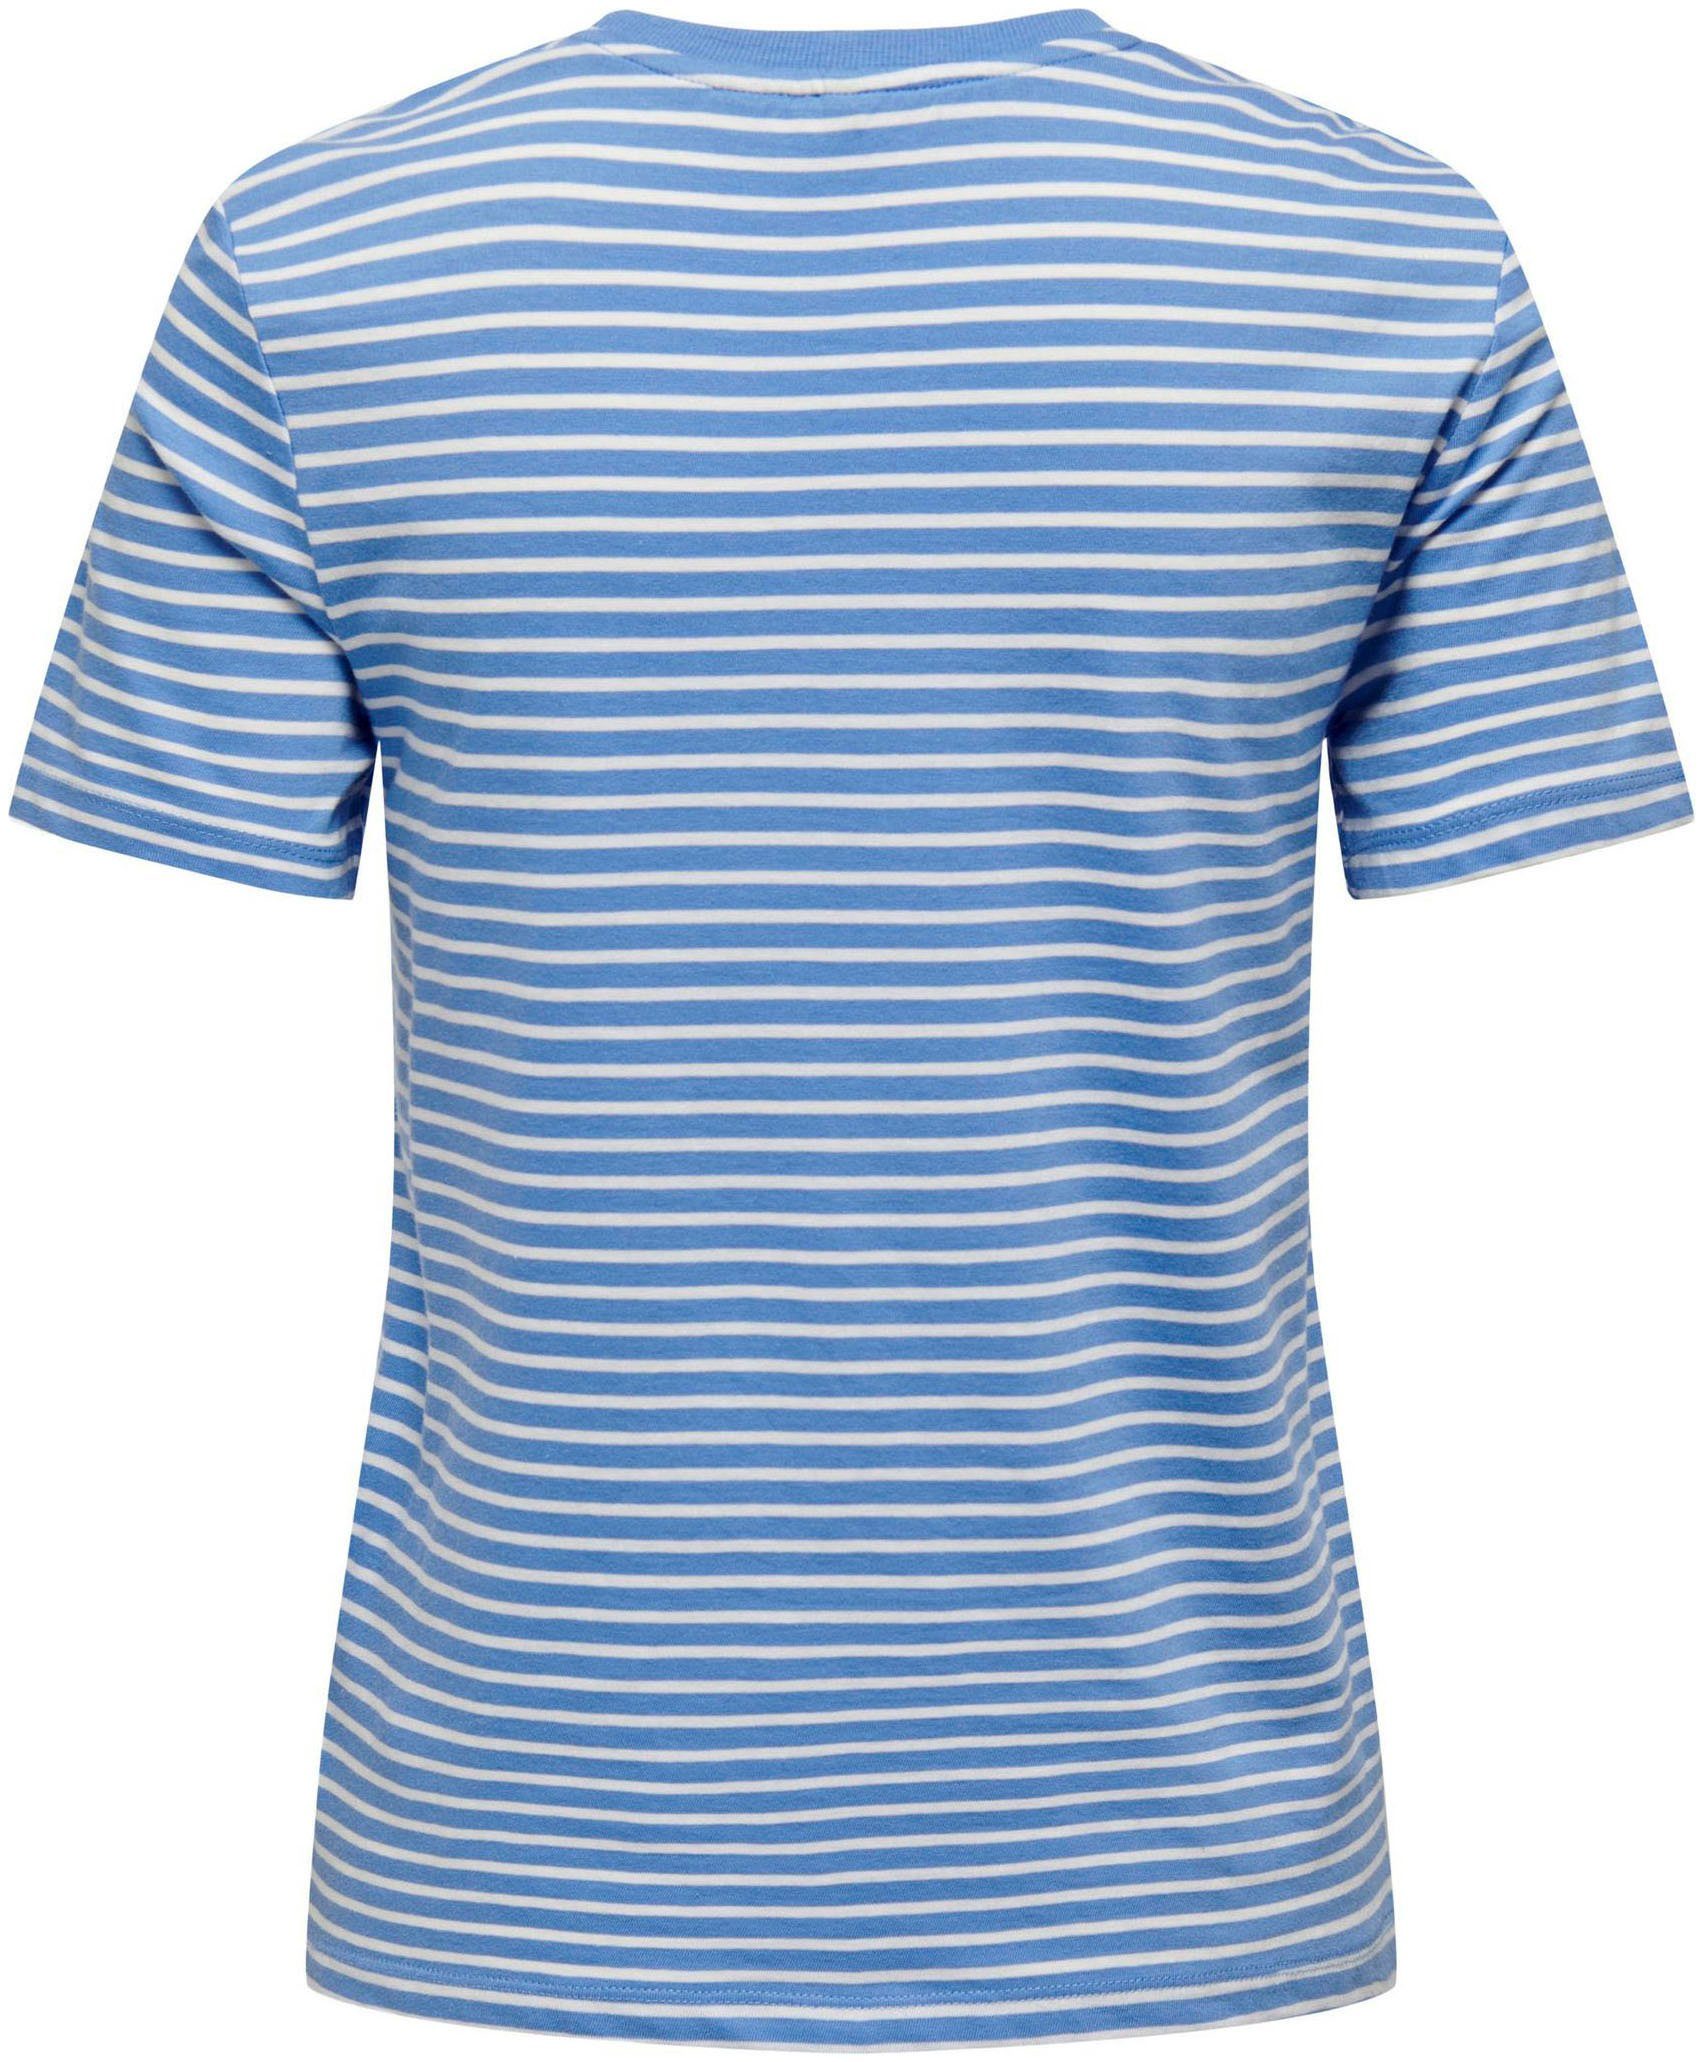 ONLY Rundhalsshirt ONLWEEKDAY REG red) BOX STRIPE TOP Print:In S/S risk (high JRS love Provence